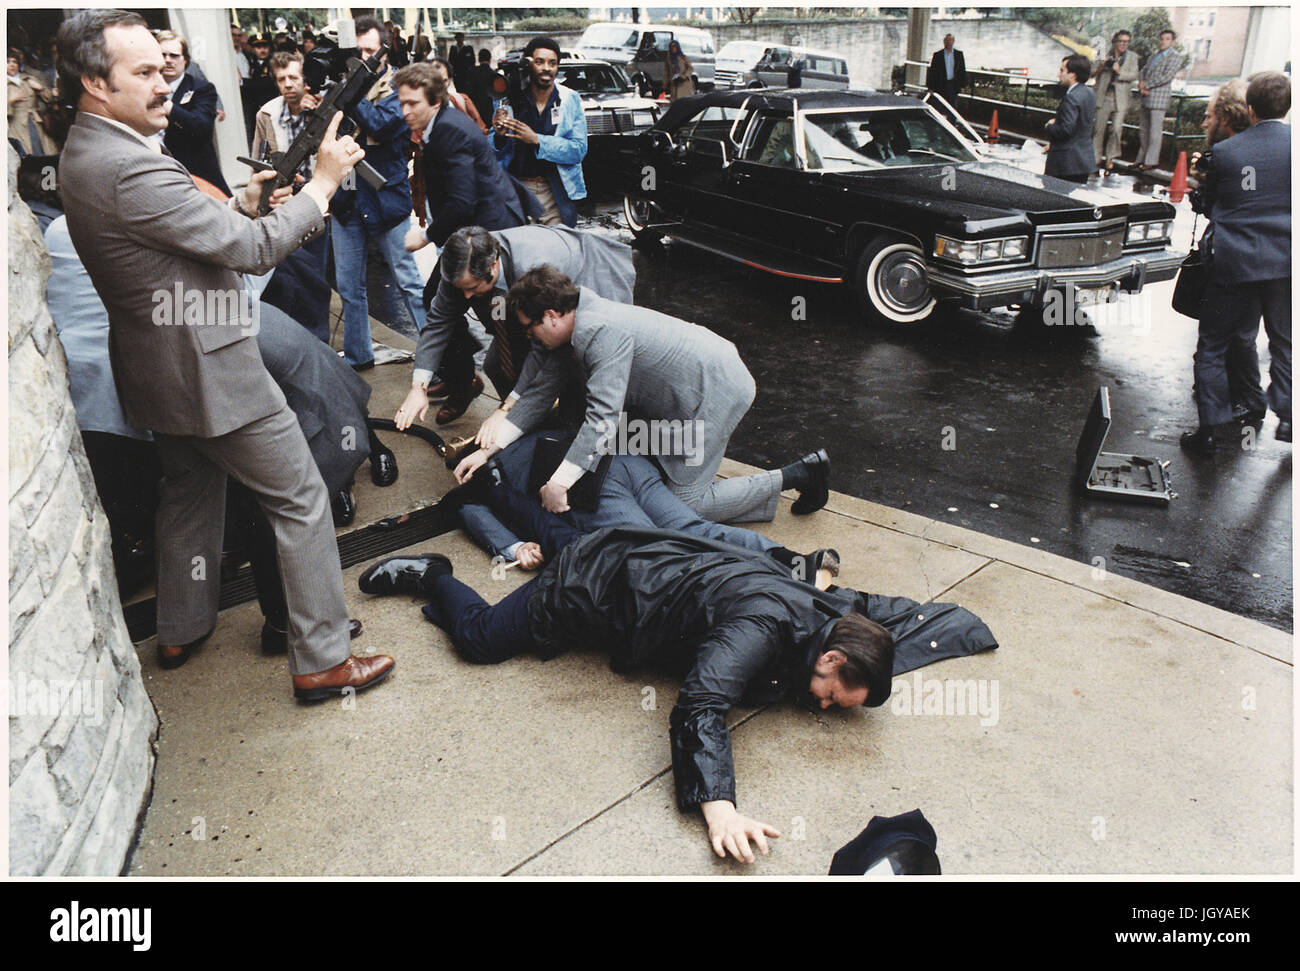 Chaos outside the Washington Hilton Hotel after the assassination attempt on President Reagan Stock Photo